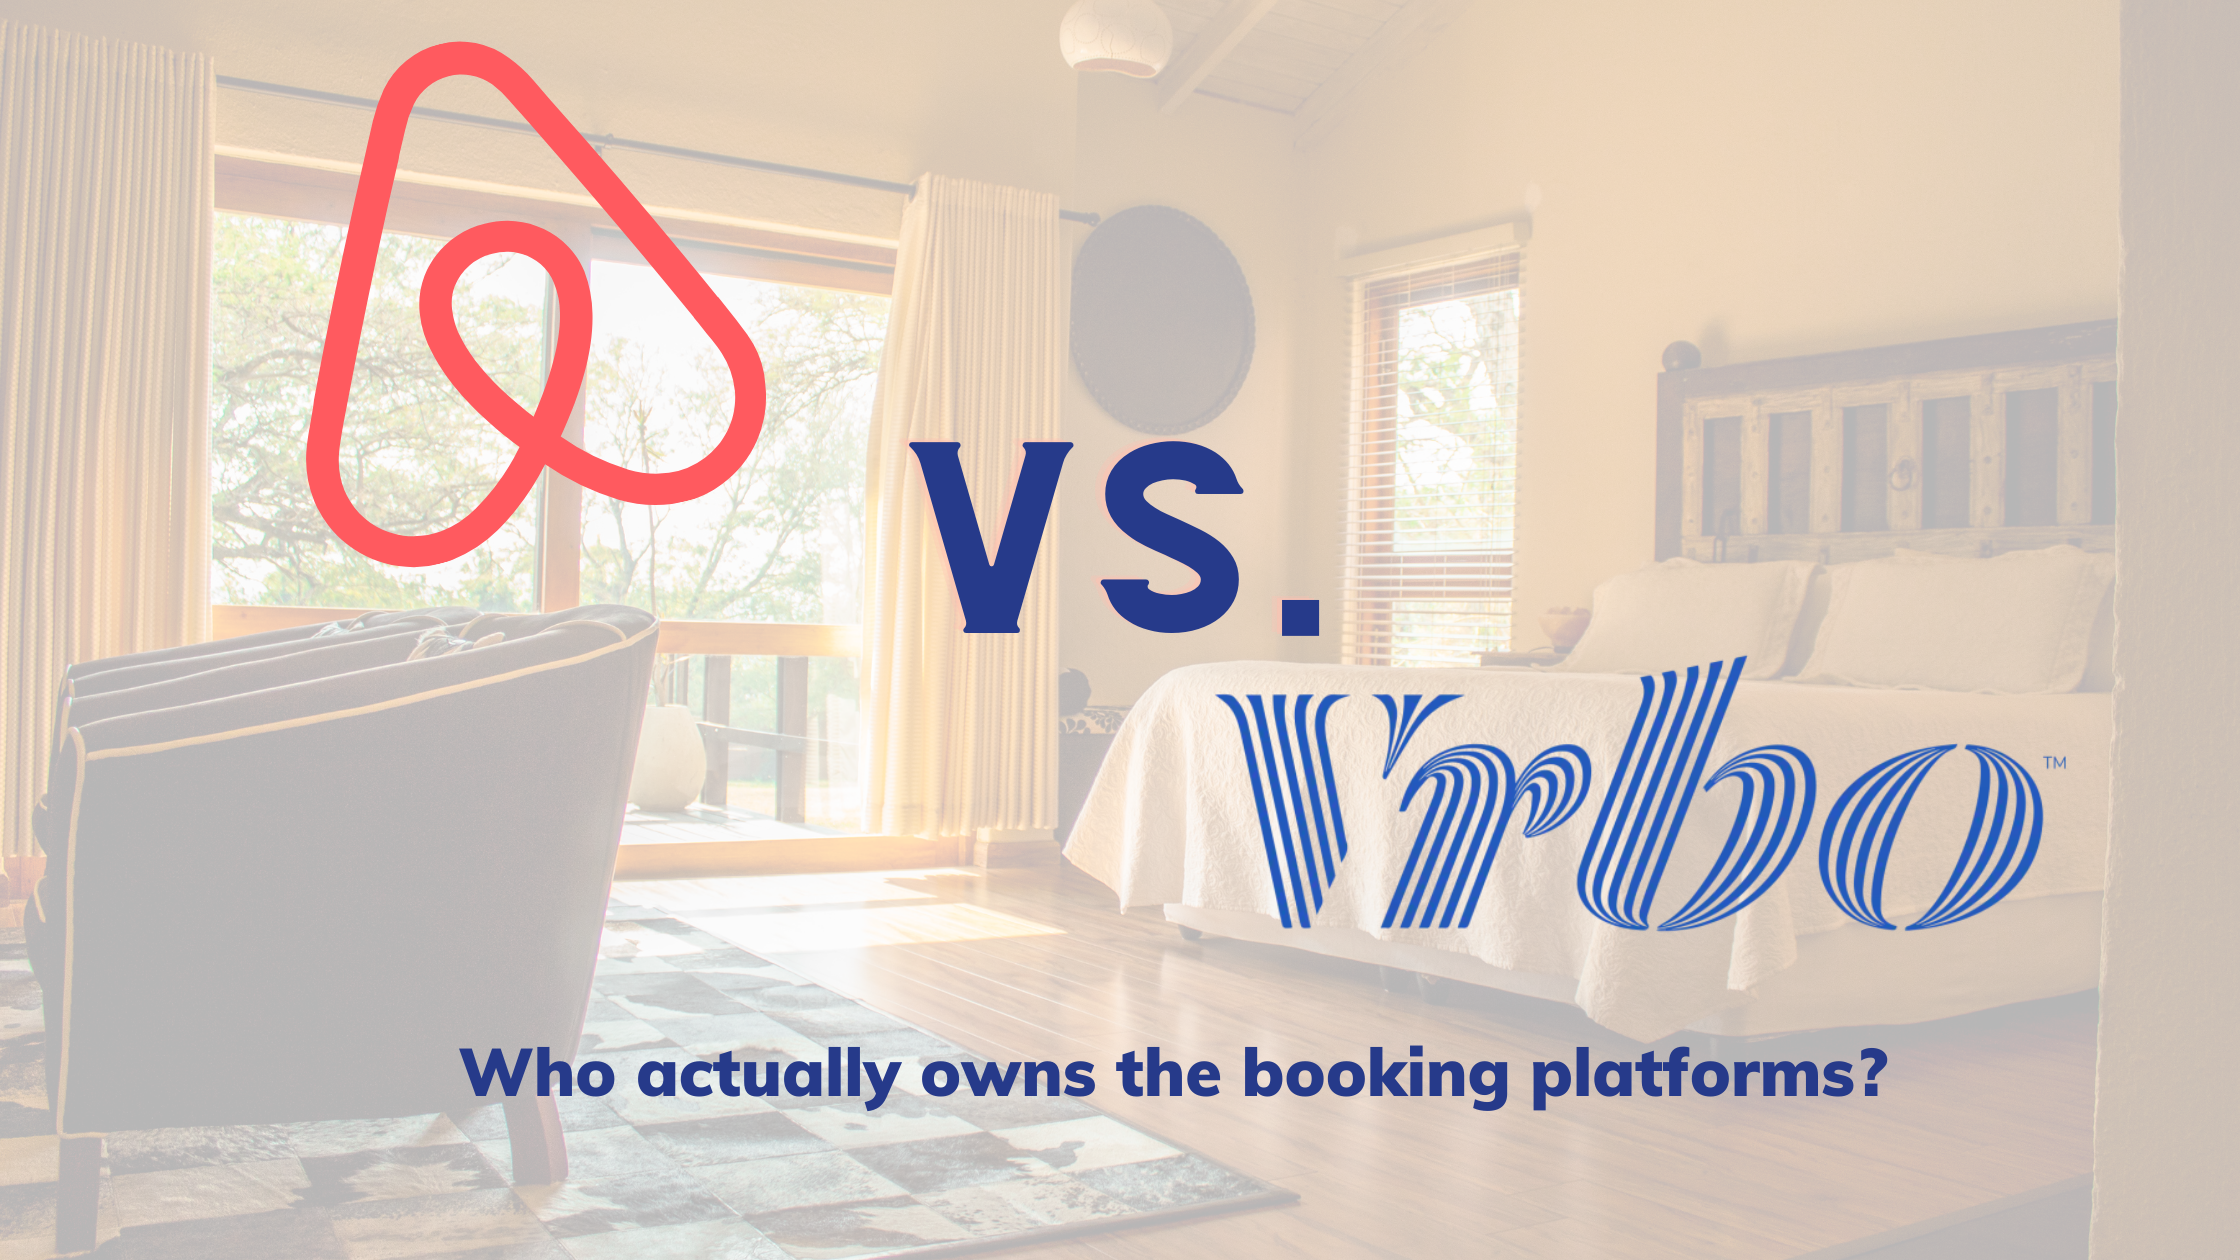 Vrbo Added to Expedia Group's Advertising Platform